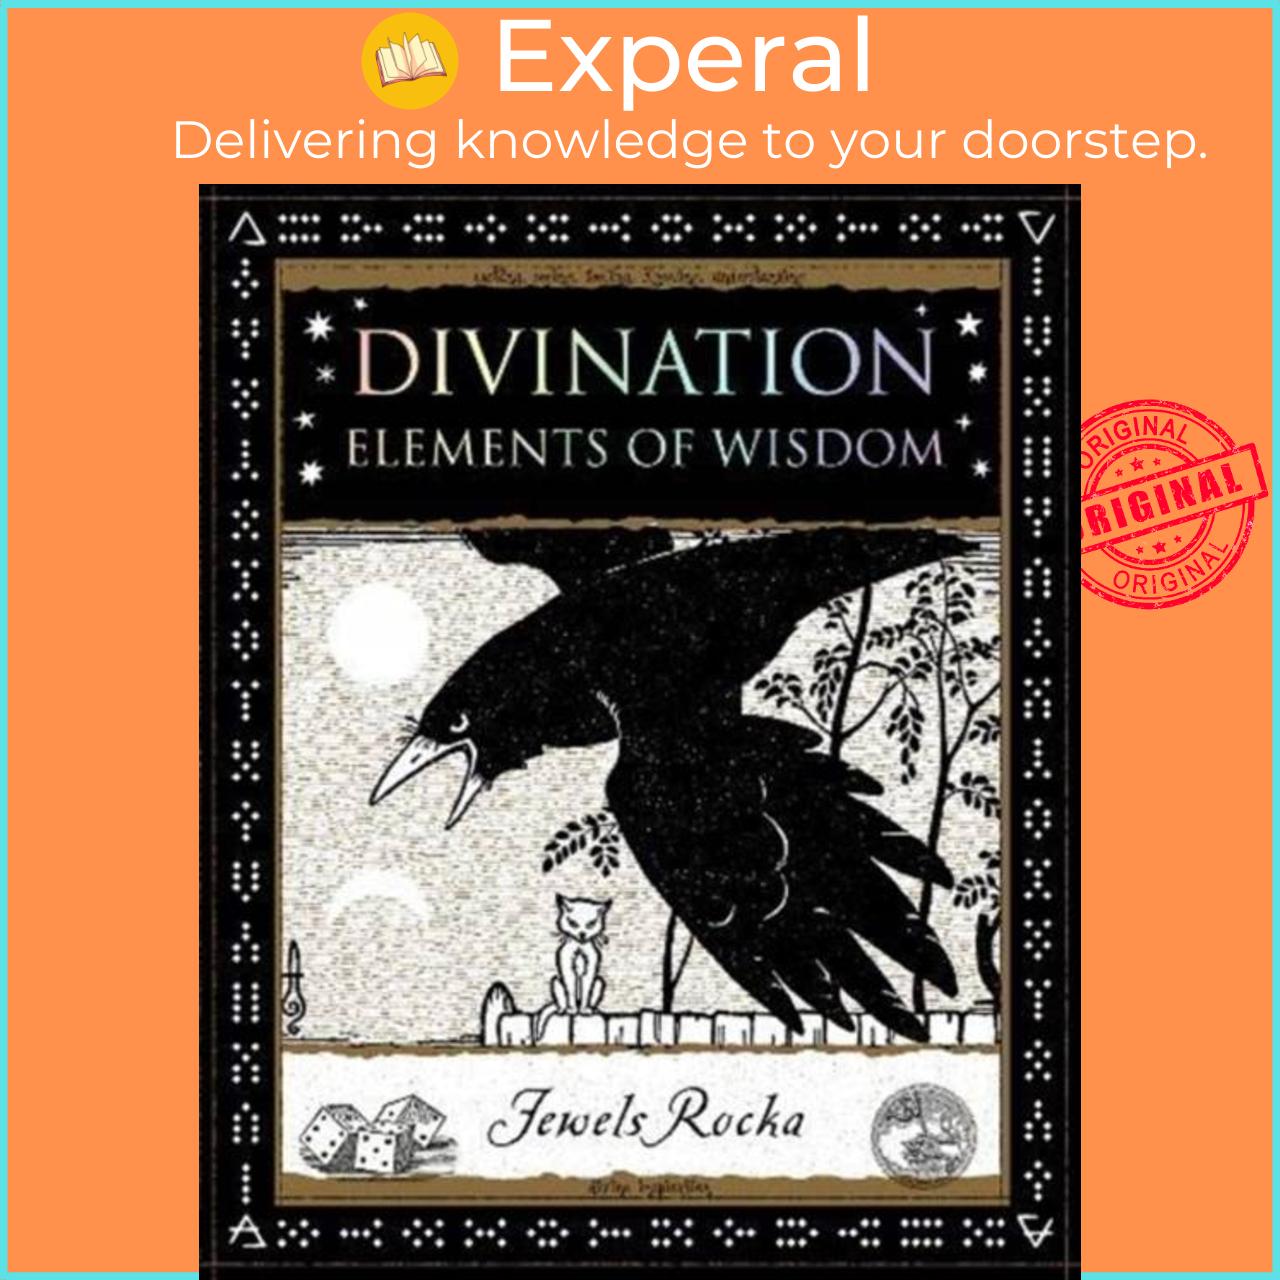 Sách - Divination - Elements of Wisdom by Jewels Rocka (UK edition, paperback)